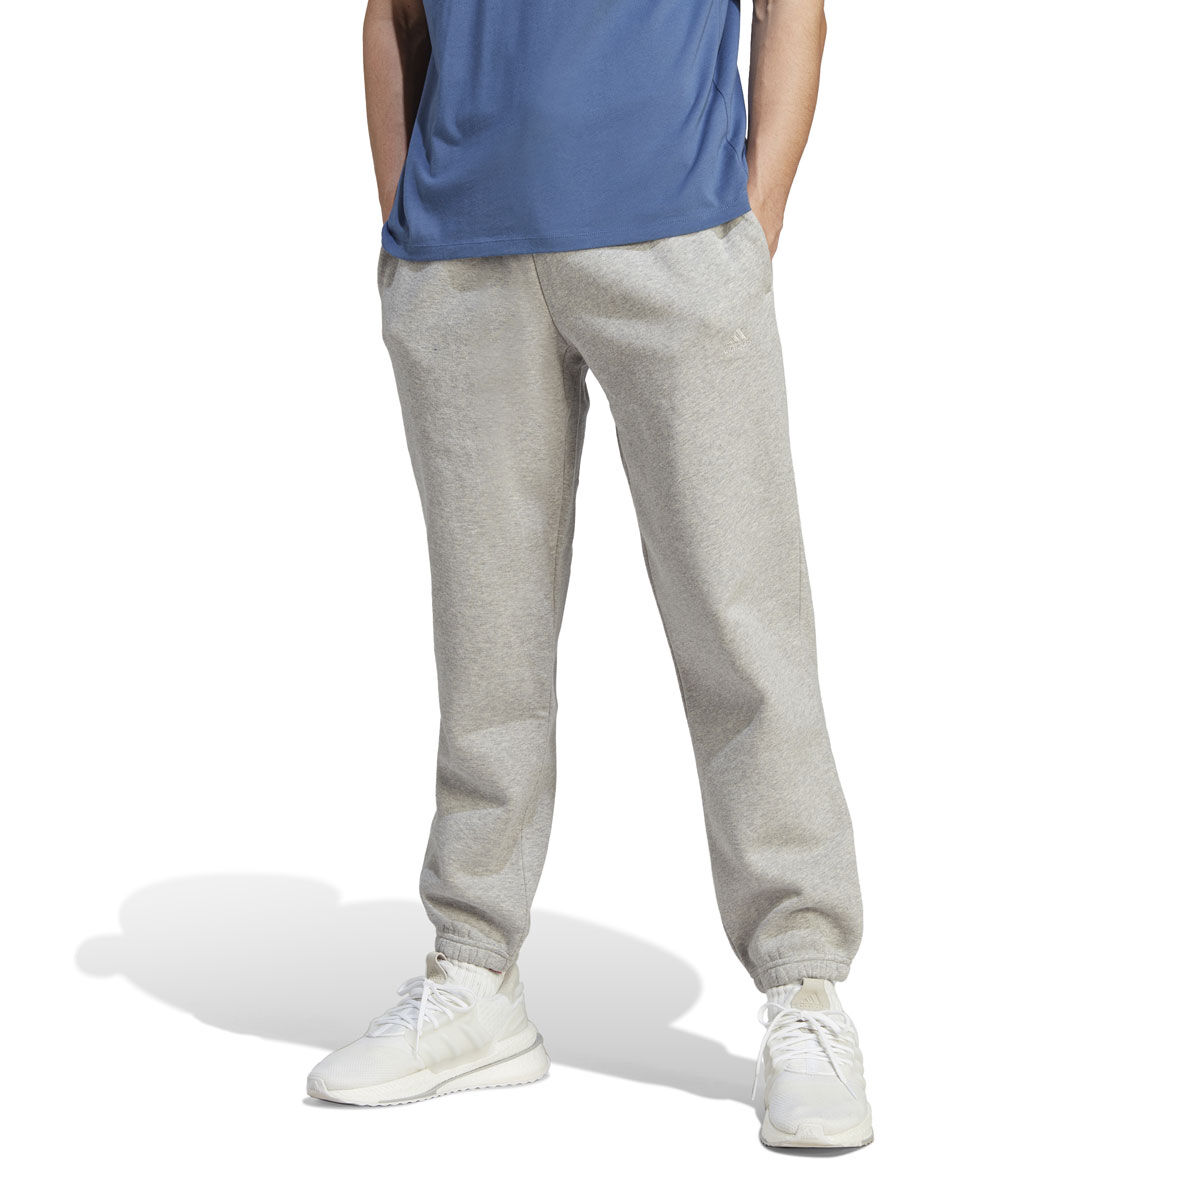 adidas Mens ALL SZN French Terry Pants